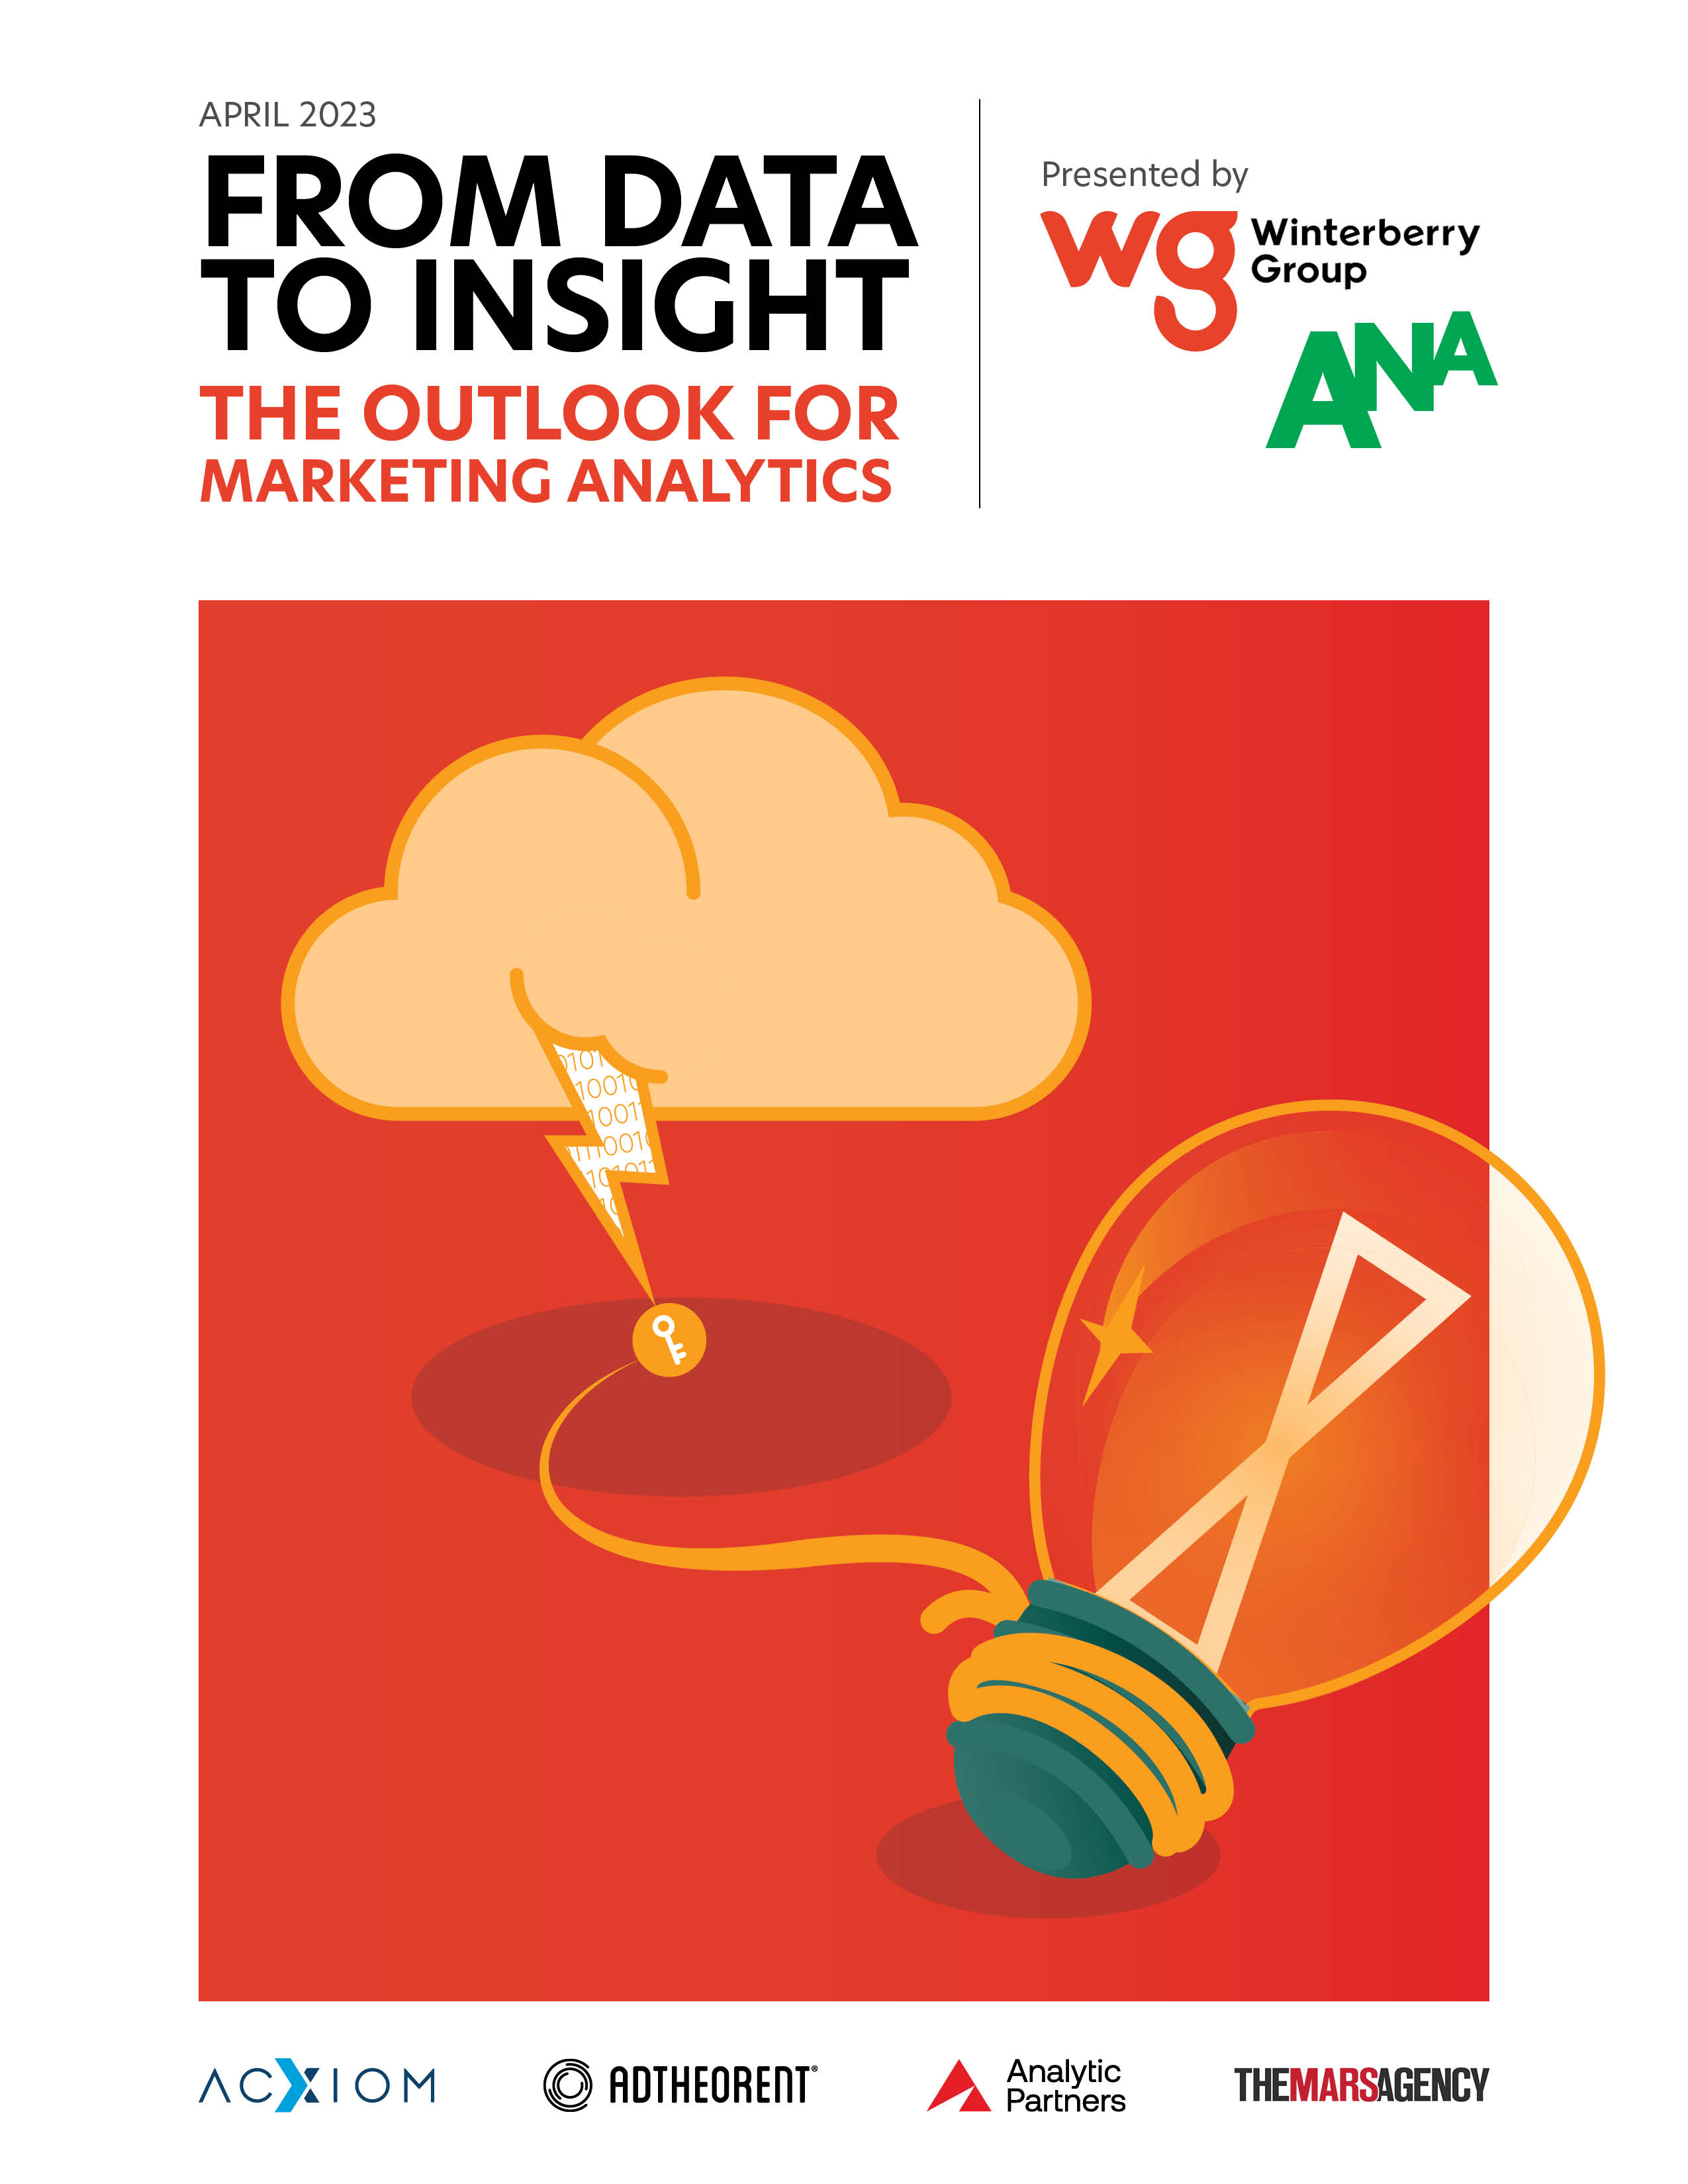 Winterberry Group Research Finds Marketing Analytics and Data Infrastructure Spend to Reach $32BB